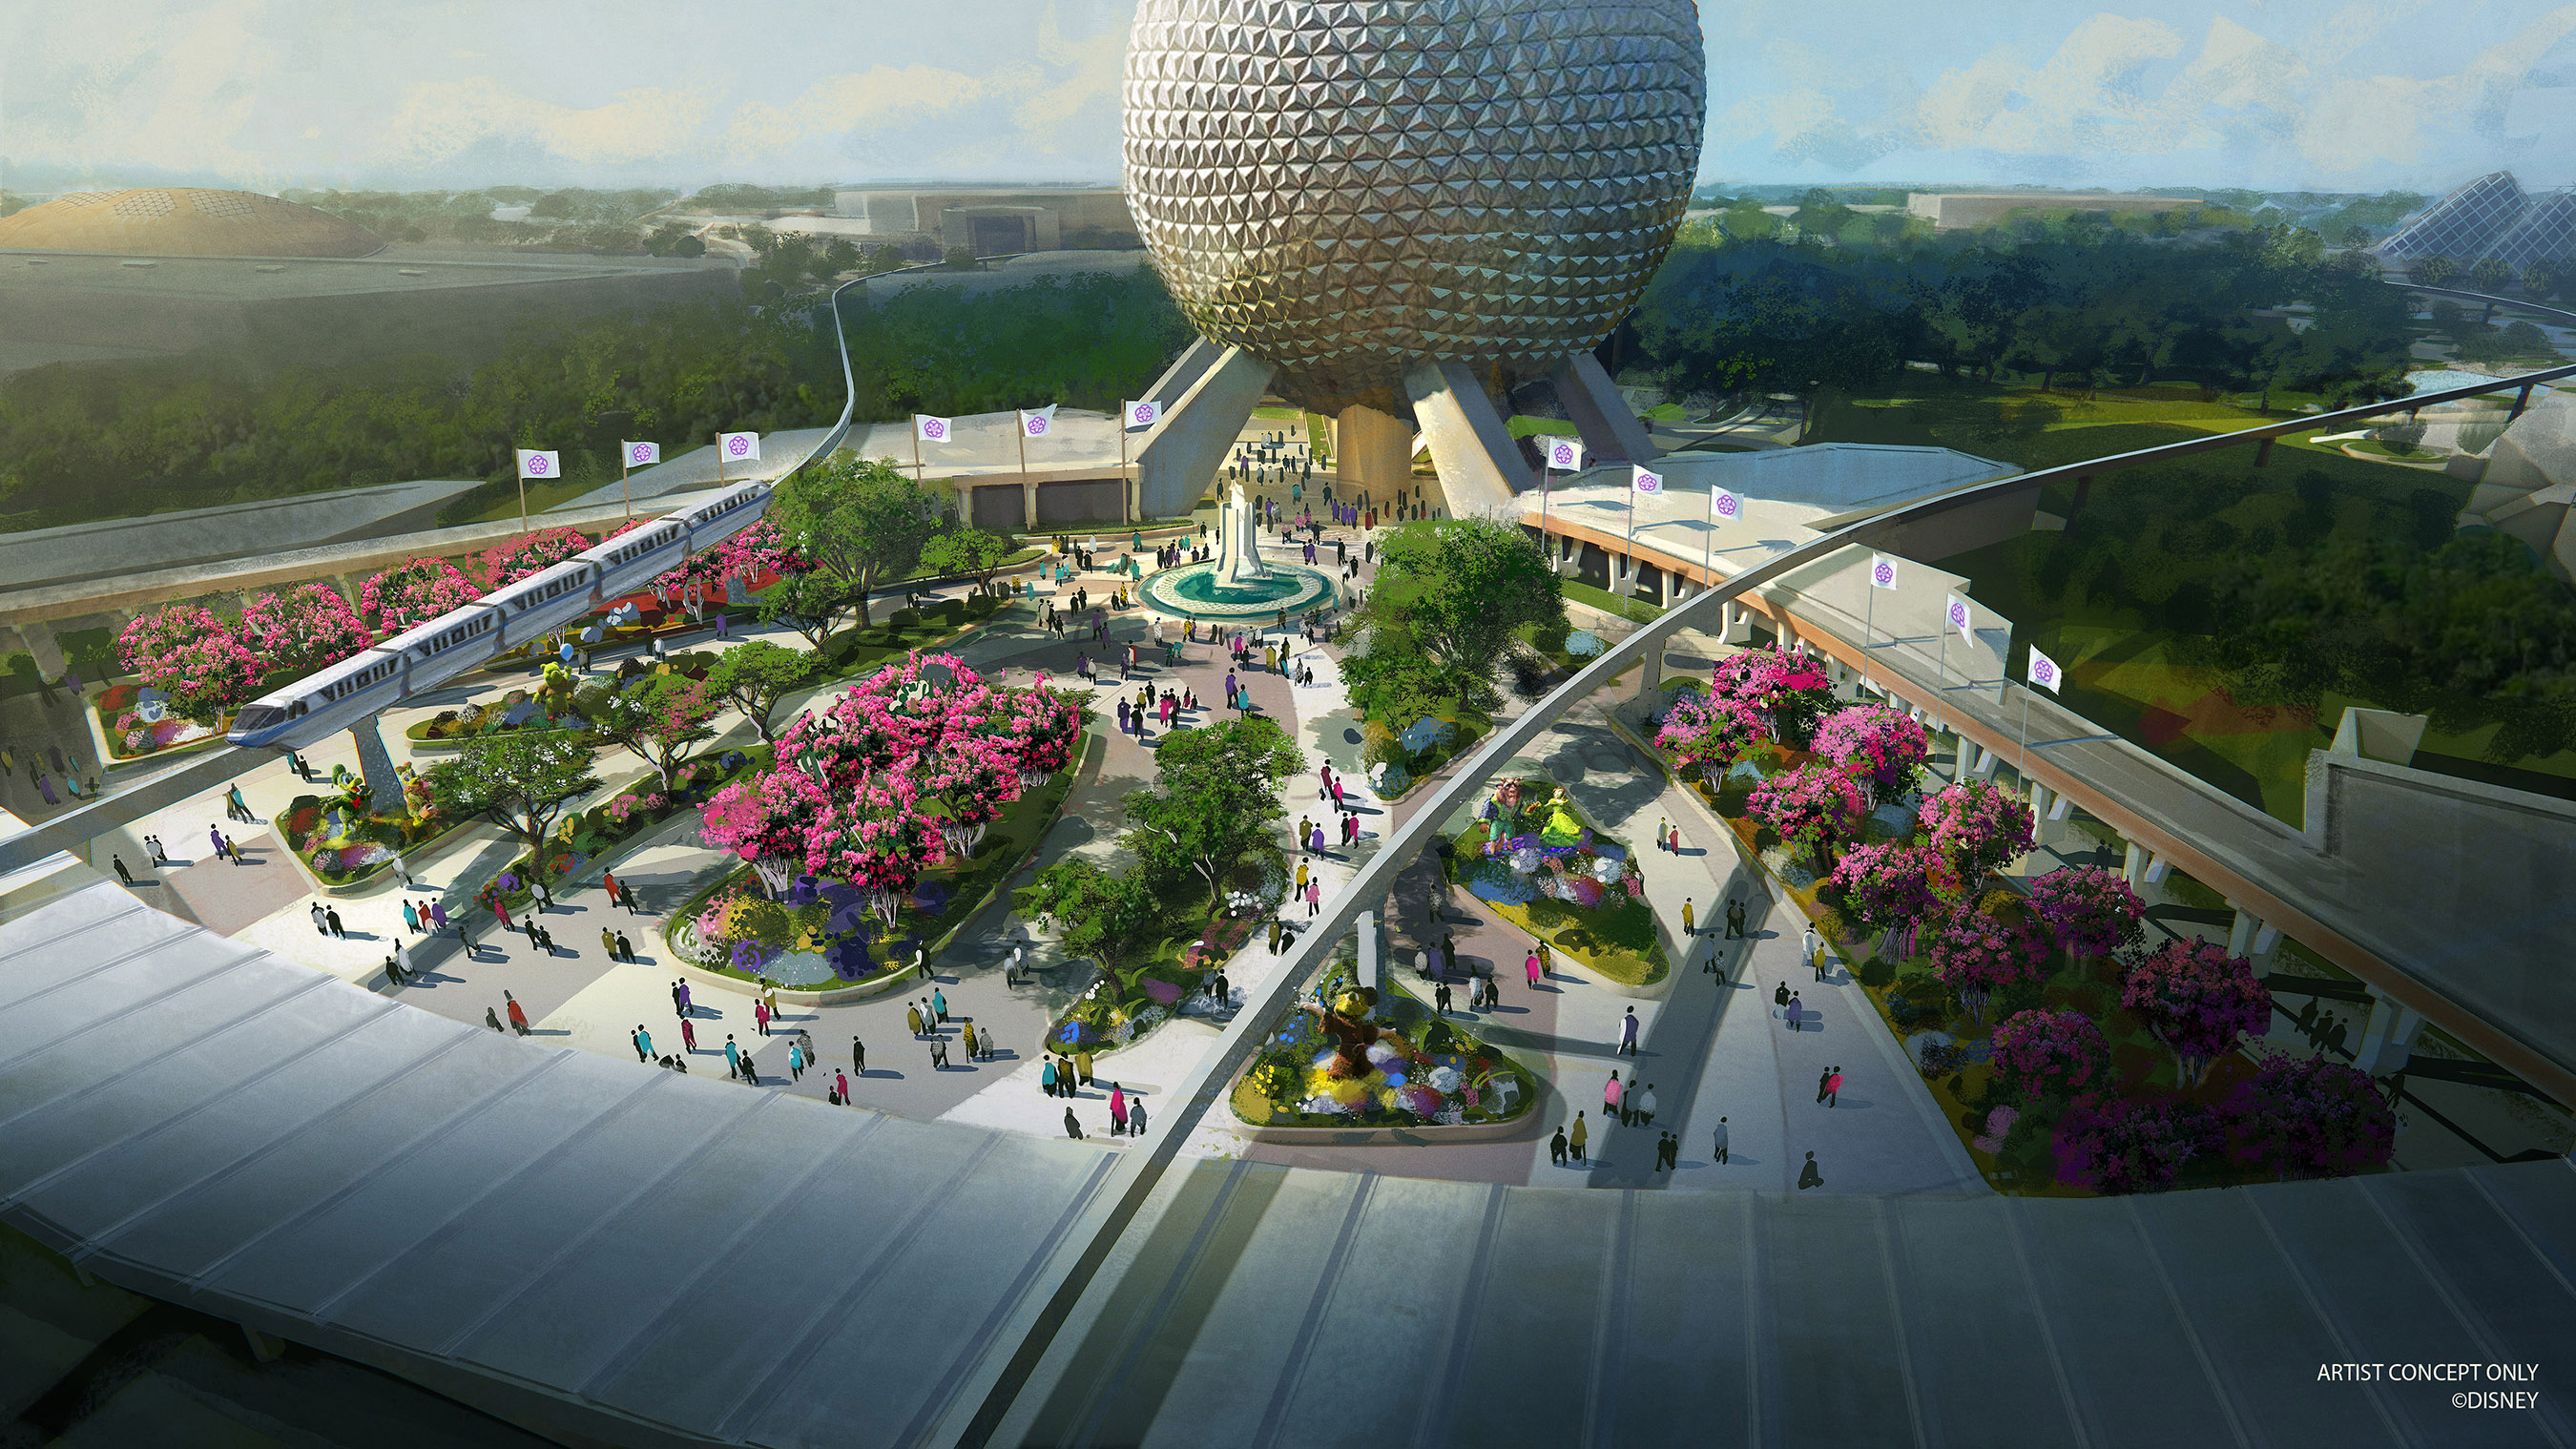 NEWS: Epcot's Transformation Continues with New Entrance and New Play